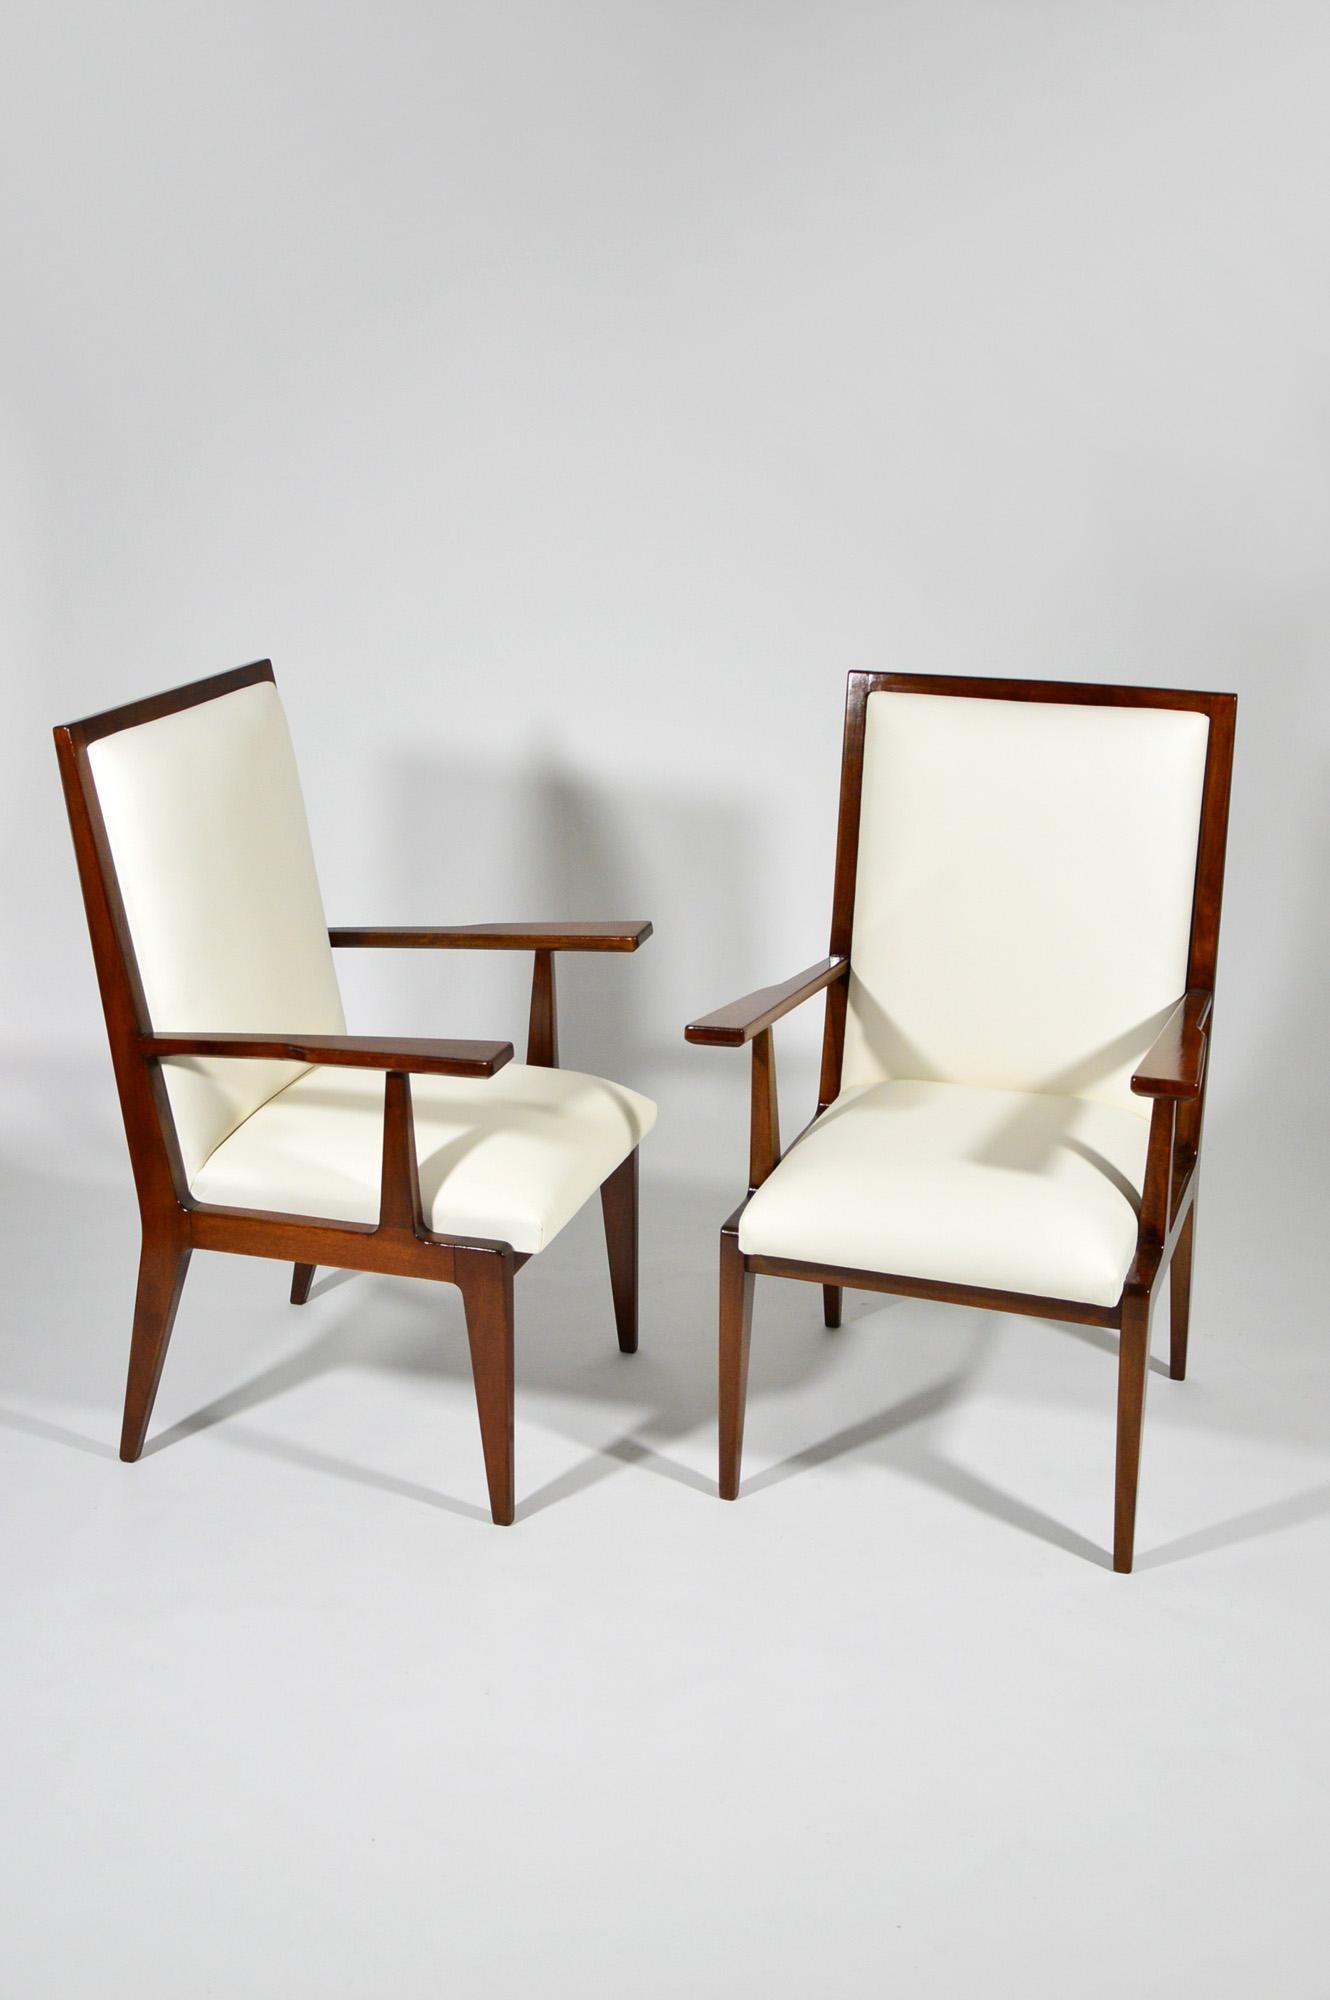 These chairs, made of Italian solid walnut, were designed by Franco Cavatorta for his family firm Silvio Cavatorta, circa 1950. They have been fully restored and upholstered with warm white good quality faux leather. Original metal plate 